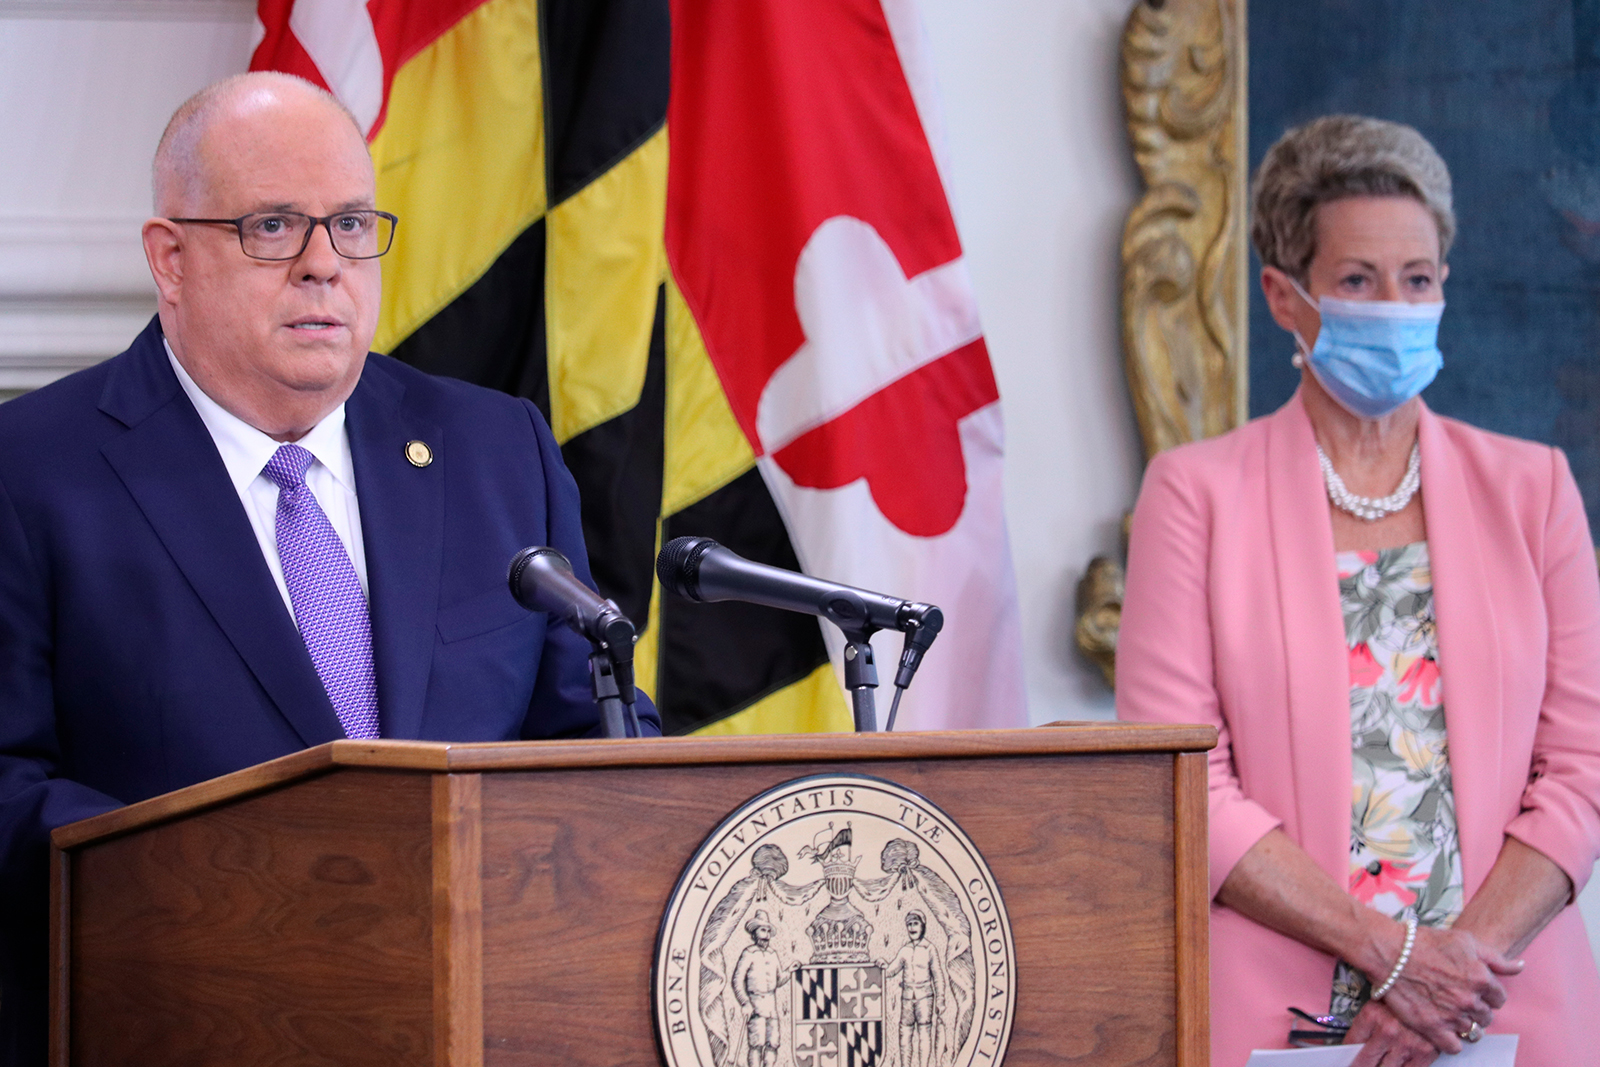 Gov. Larry Hogan speaks during a news conference in in Annapolis, Maryland on August, 27.